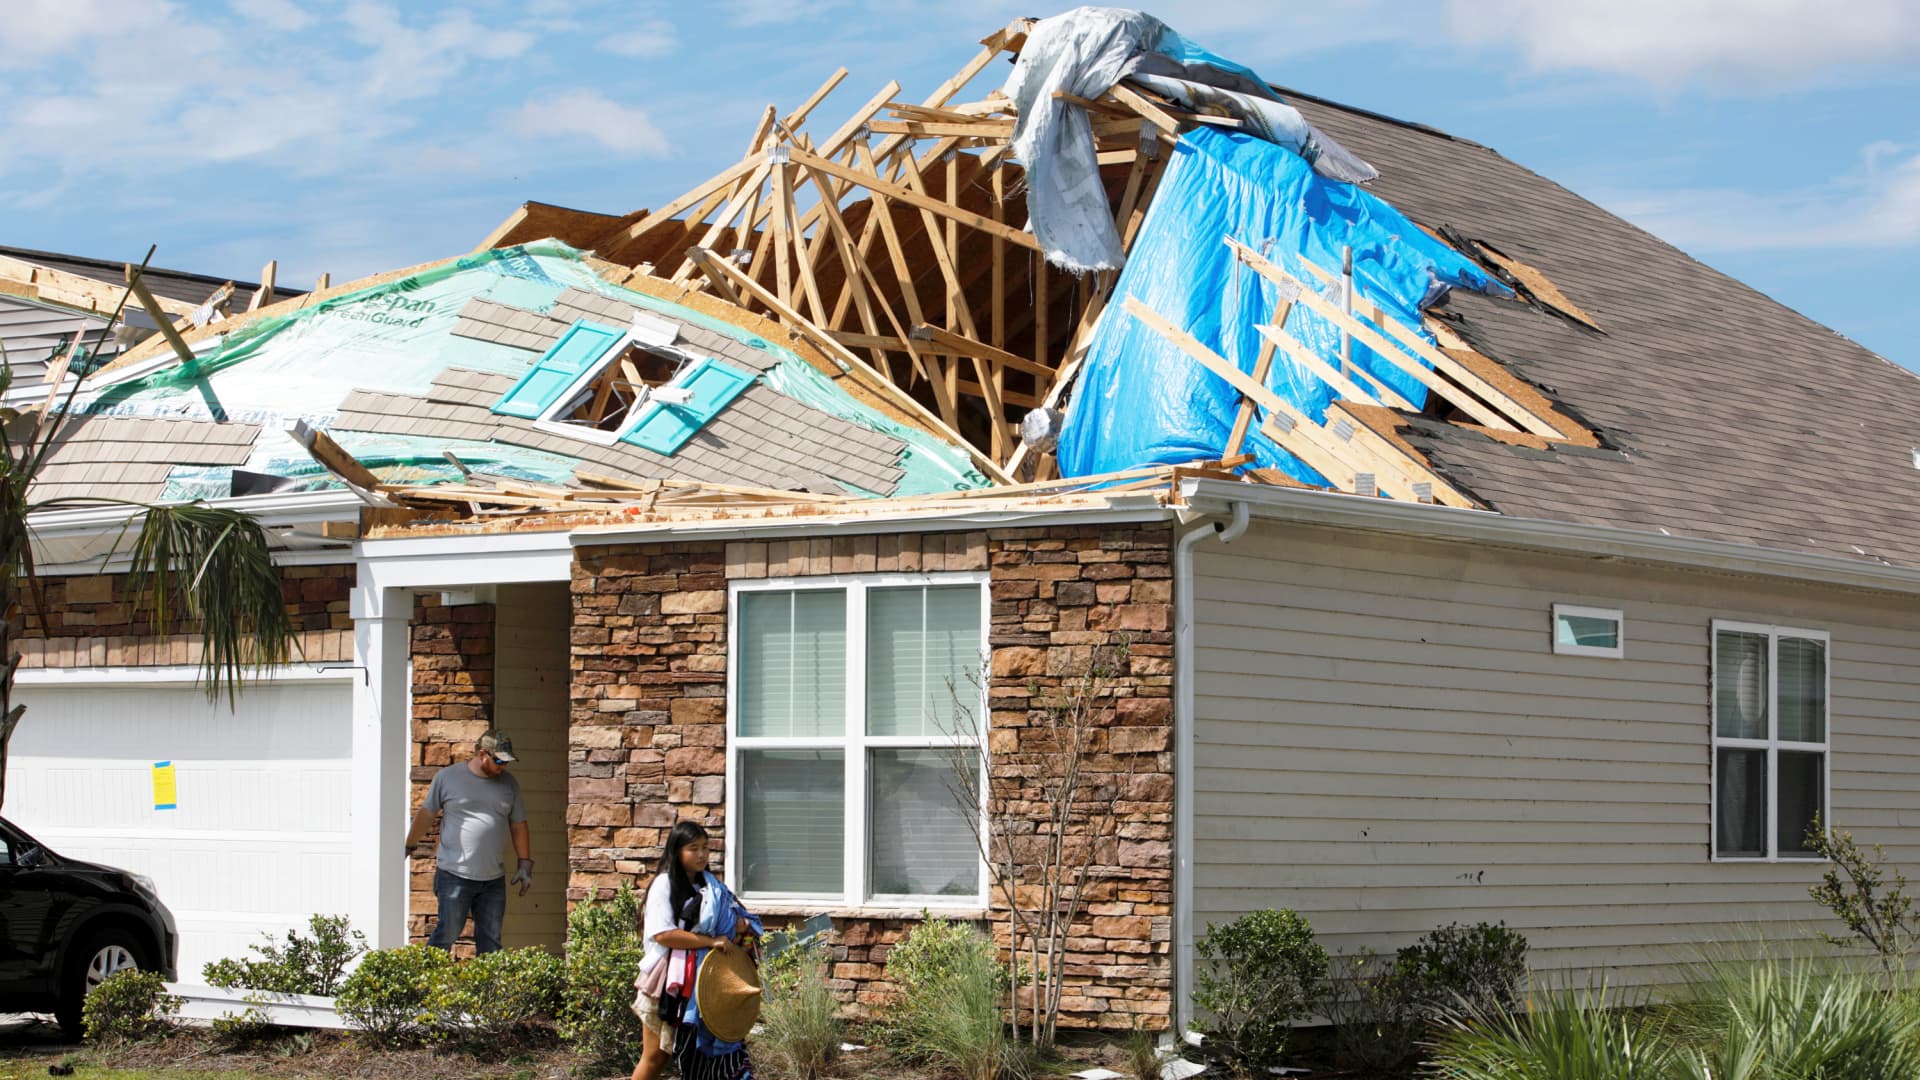 Will climate change make your homeowners insurance unaffordable? Here's what you need to know